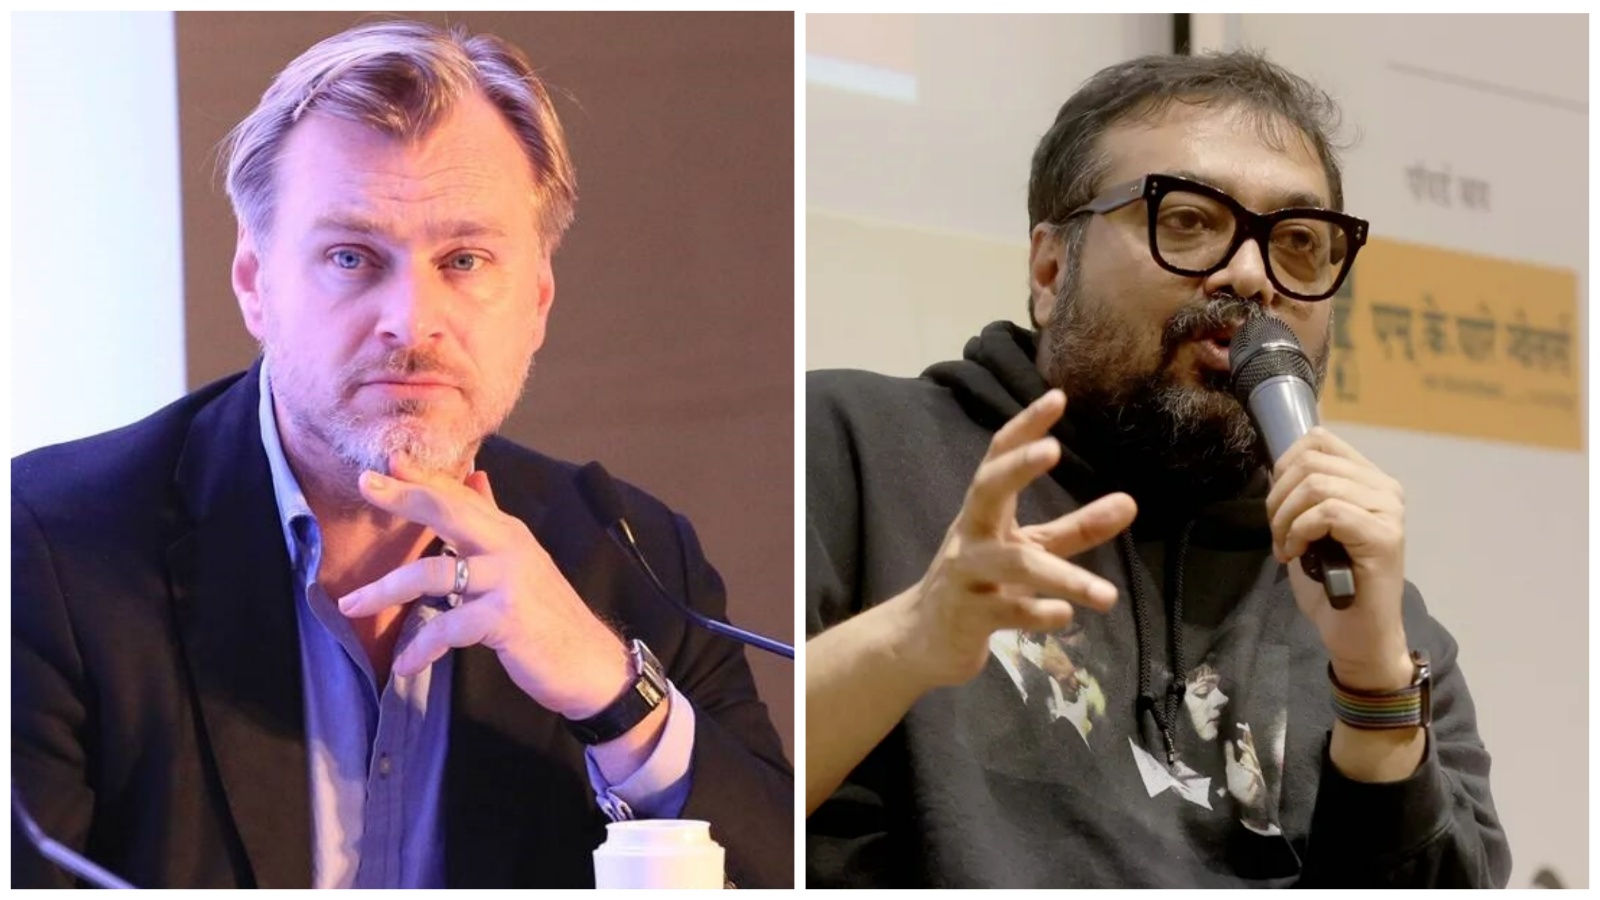 You will be shocked at how Christopher Nolan was treated by Indian authorities: Anurag Kashyap says Indians have no interest in empowering cinema |  Bollywood News